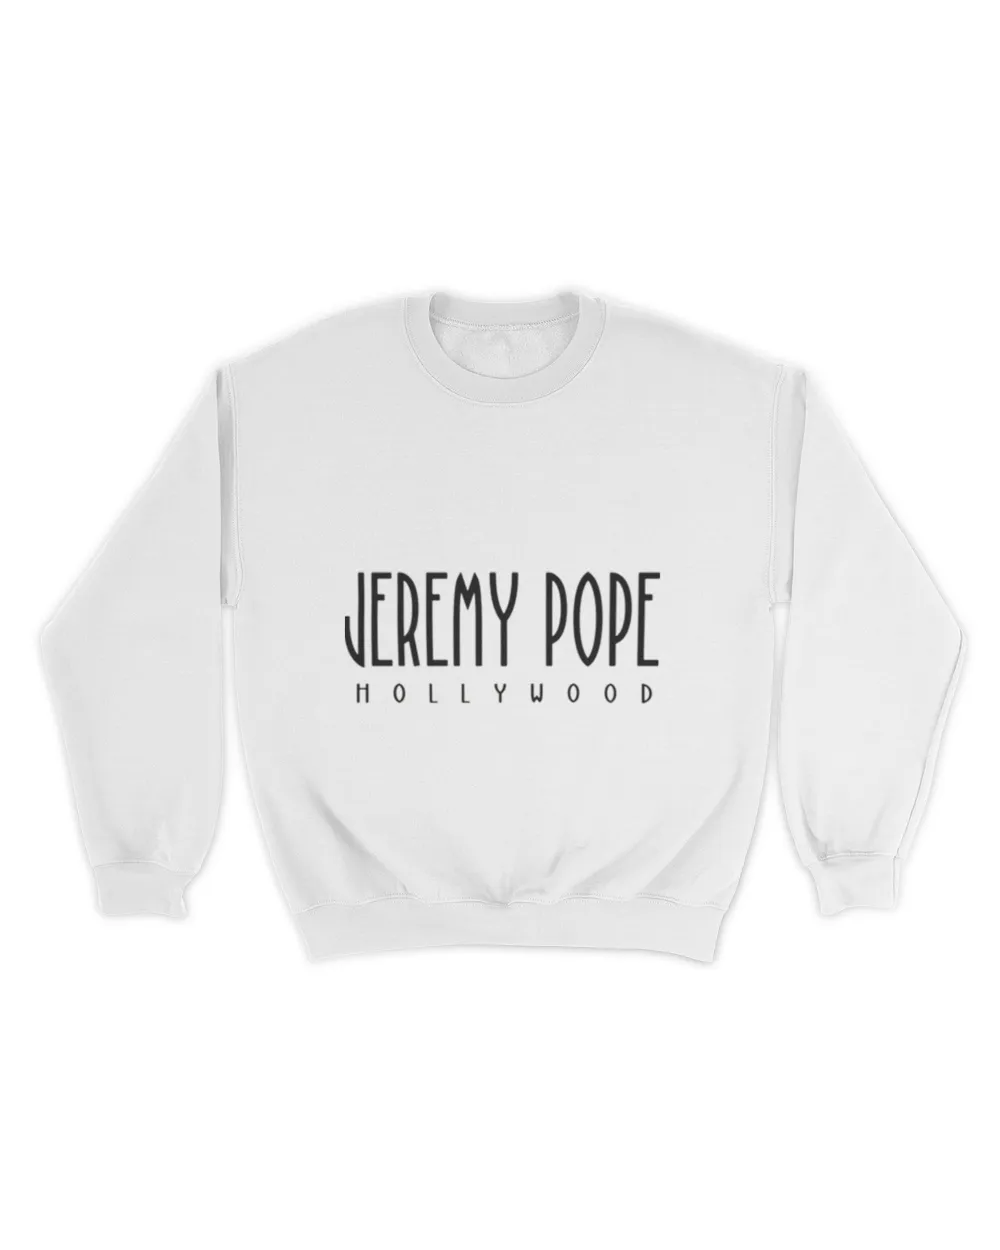 Jeremy Pope Hollywood Actor shirt